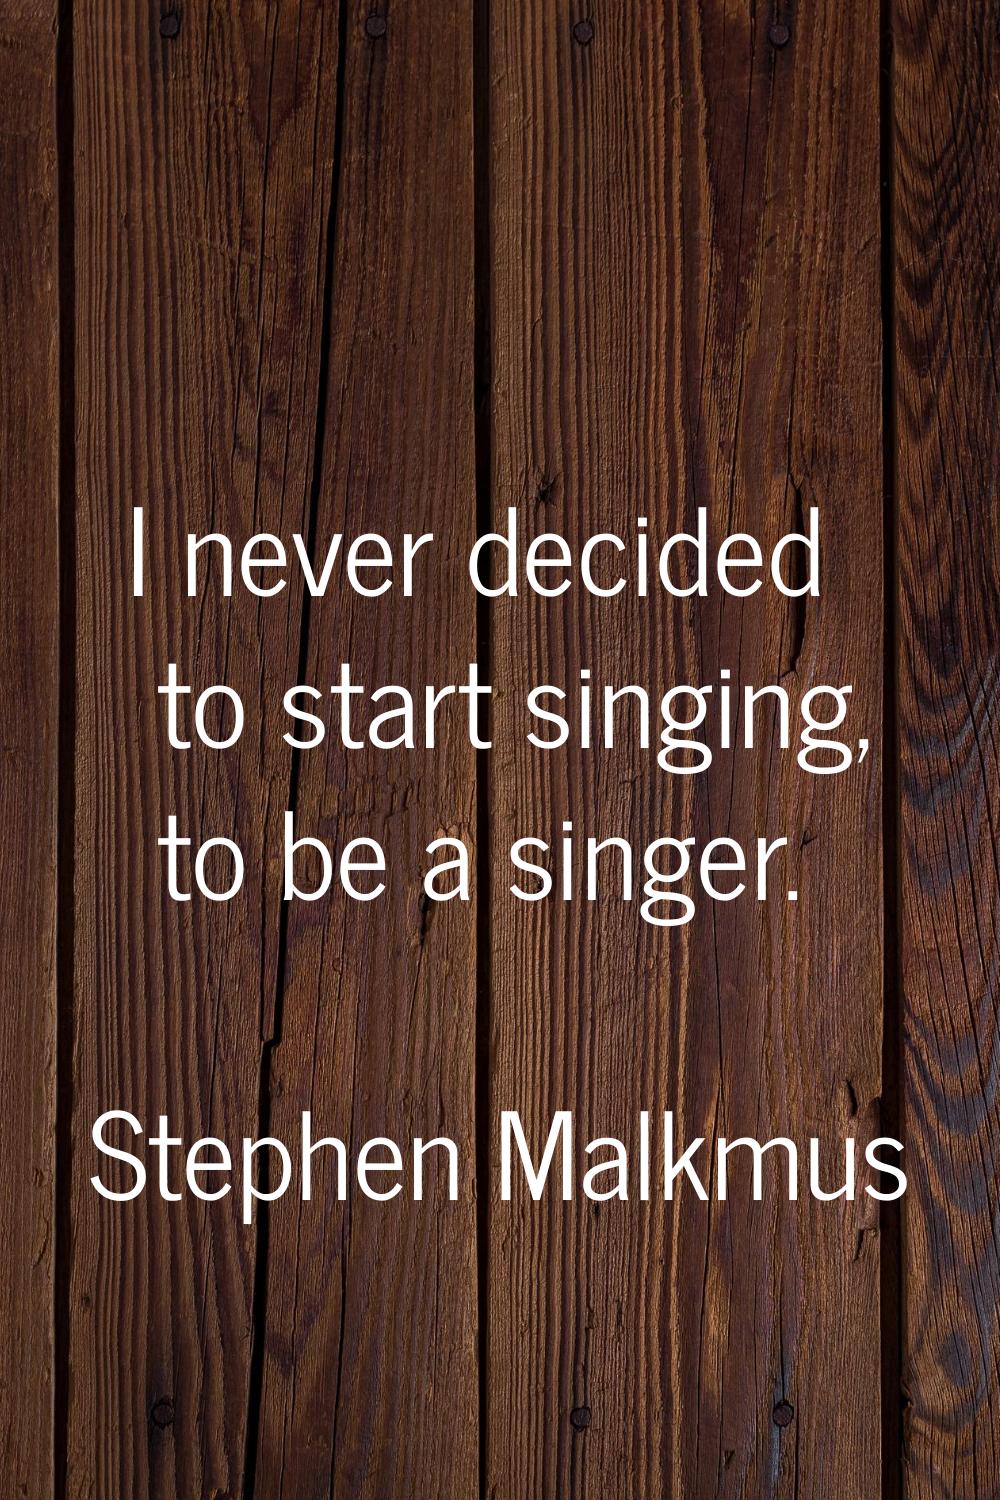 I never decided to start singing, to be a singer.